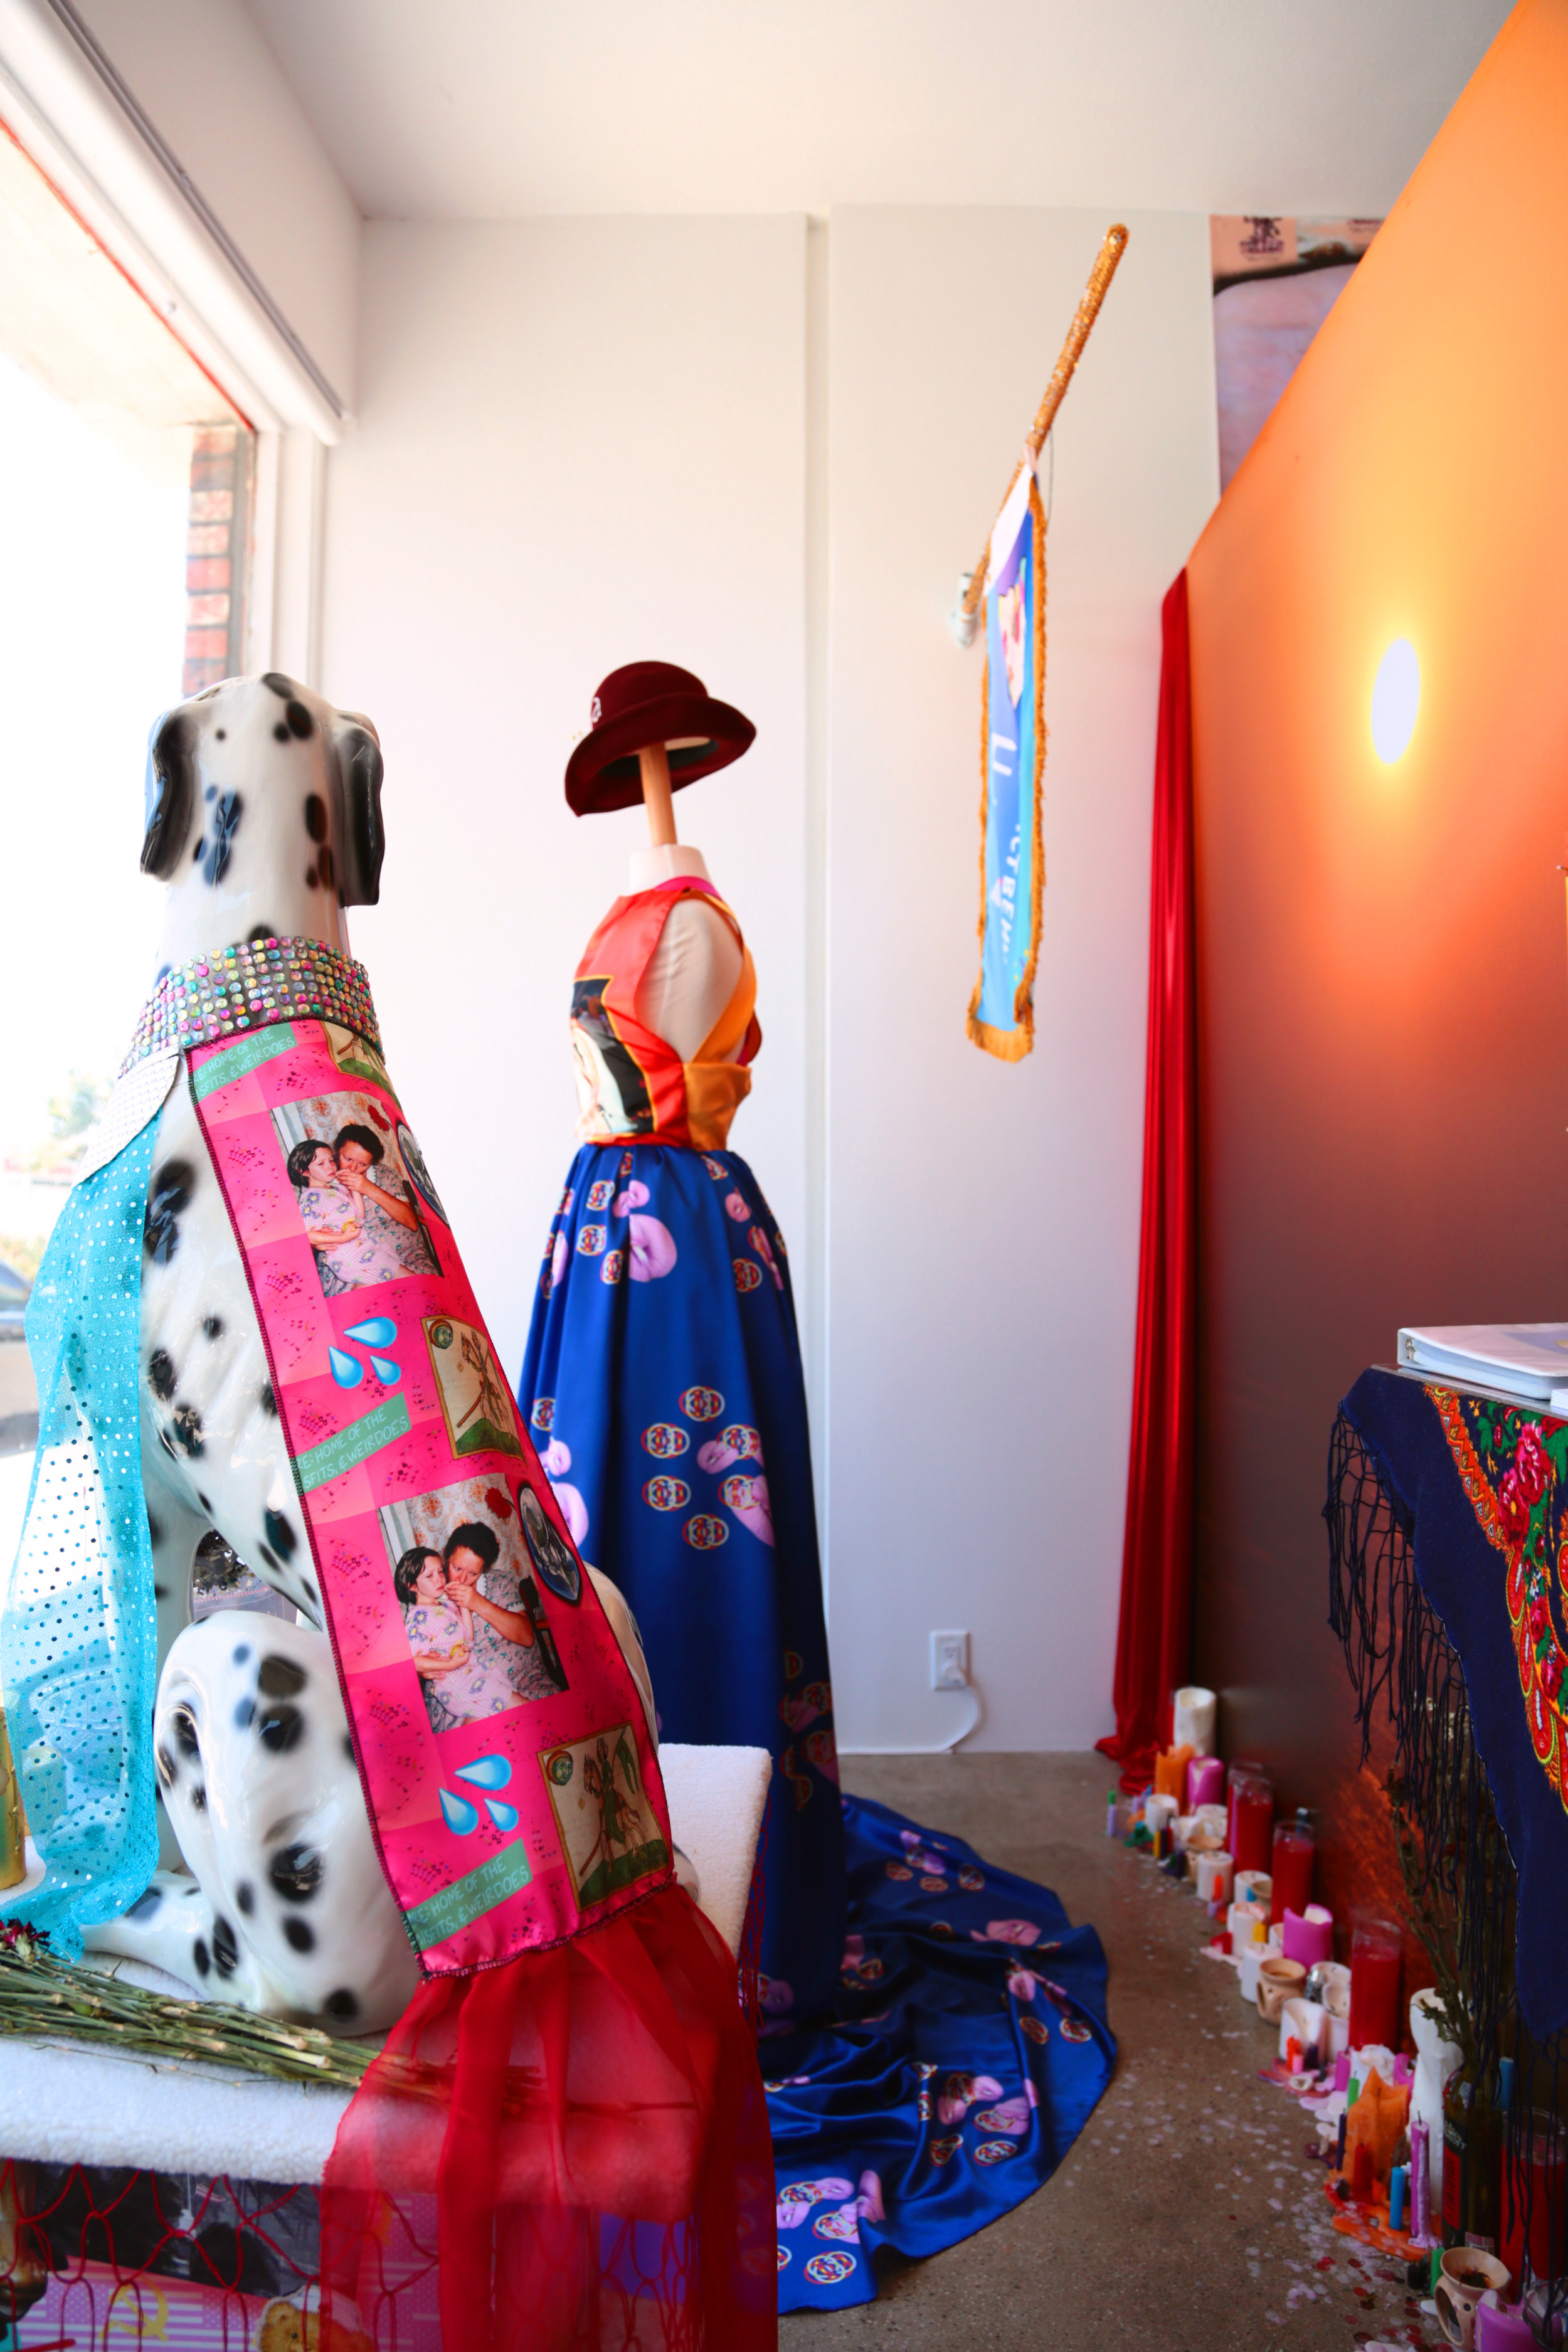  Installation view of  Molly Surazhsky   Mashacare Home of the Freaks, Misfits, &amp; Weirdoes   July 14 - August 18, 2019  Photo by Ruben Diaz   Link to press release.  